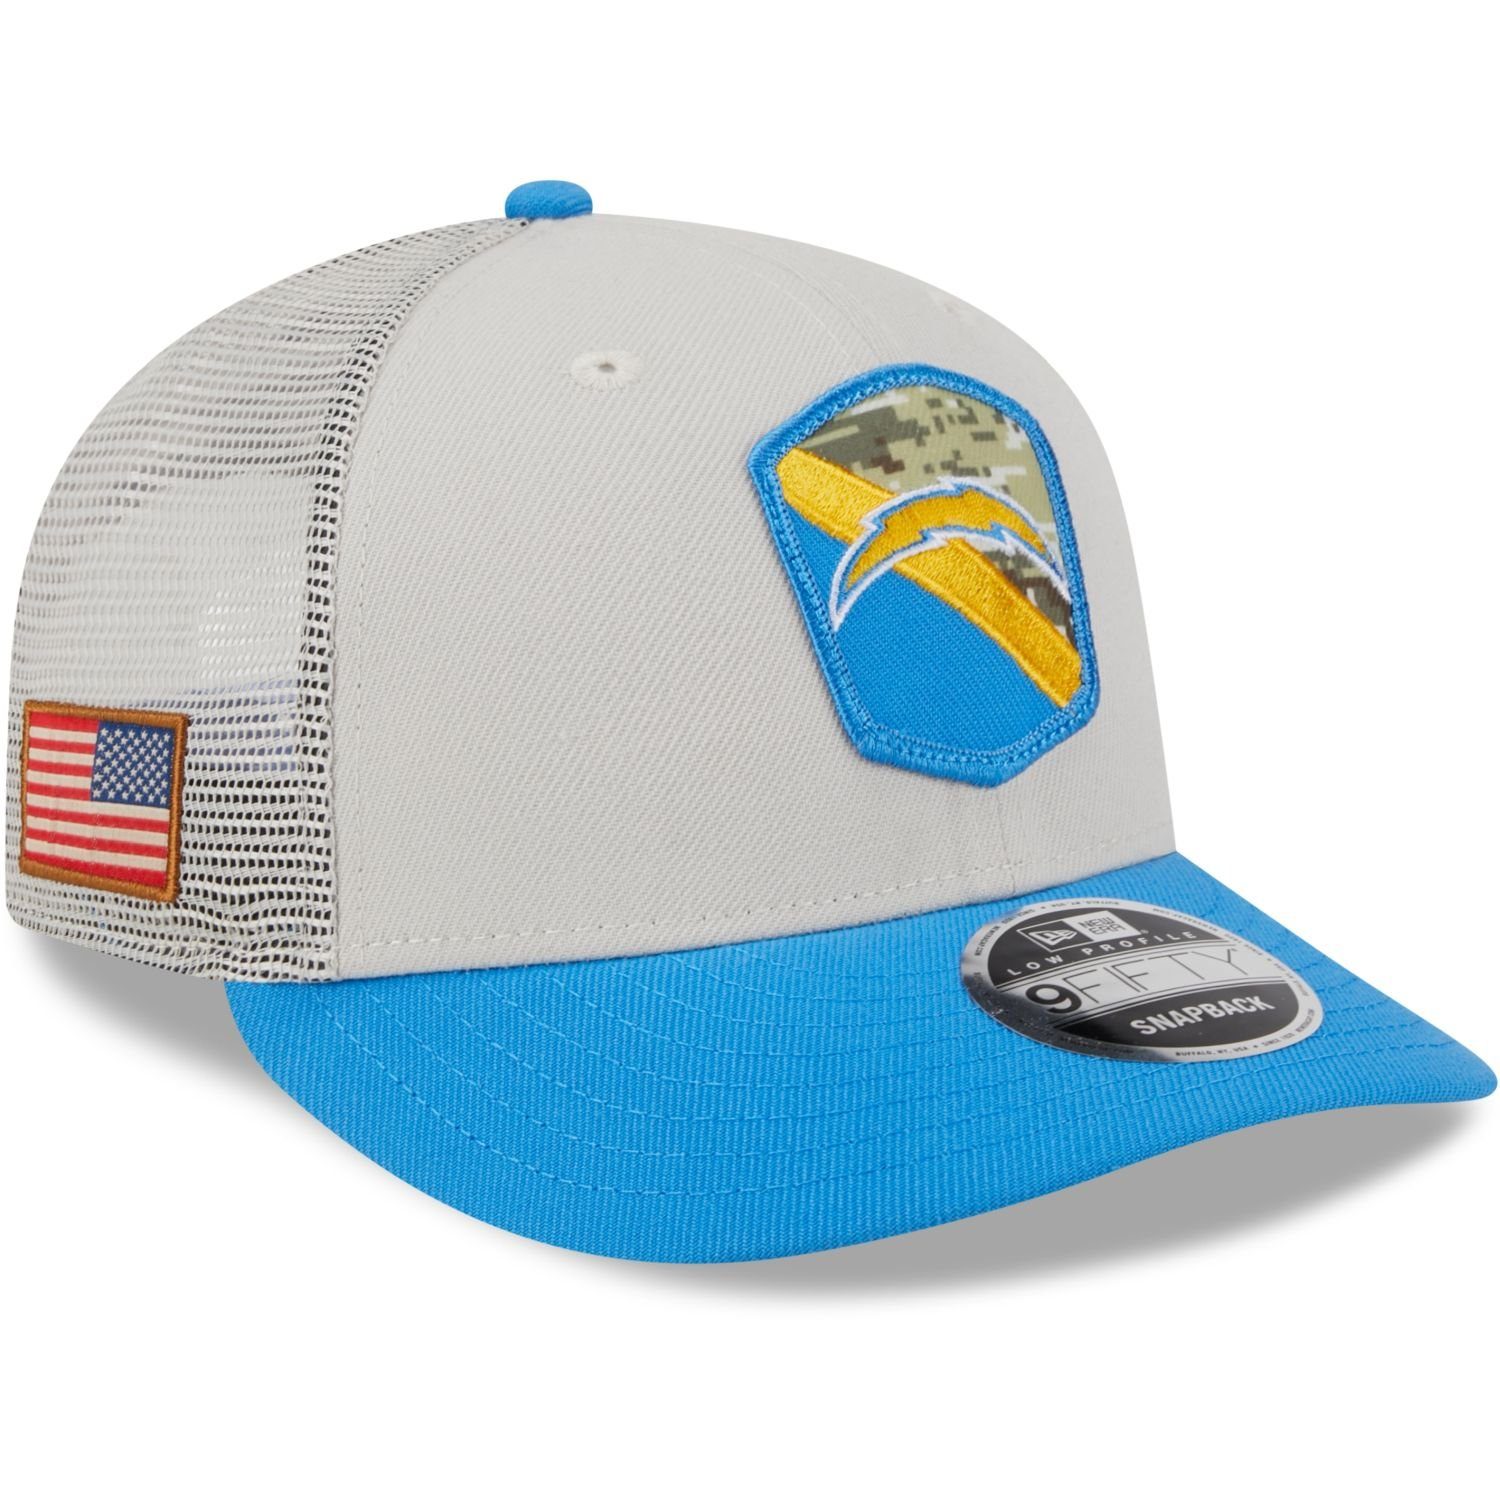 New Era Snapback Cap 9Fifty Low Profile Snap NFL Salute to Service Los Angeles Chargers